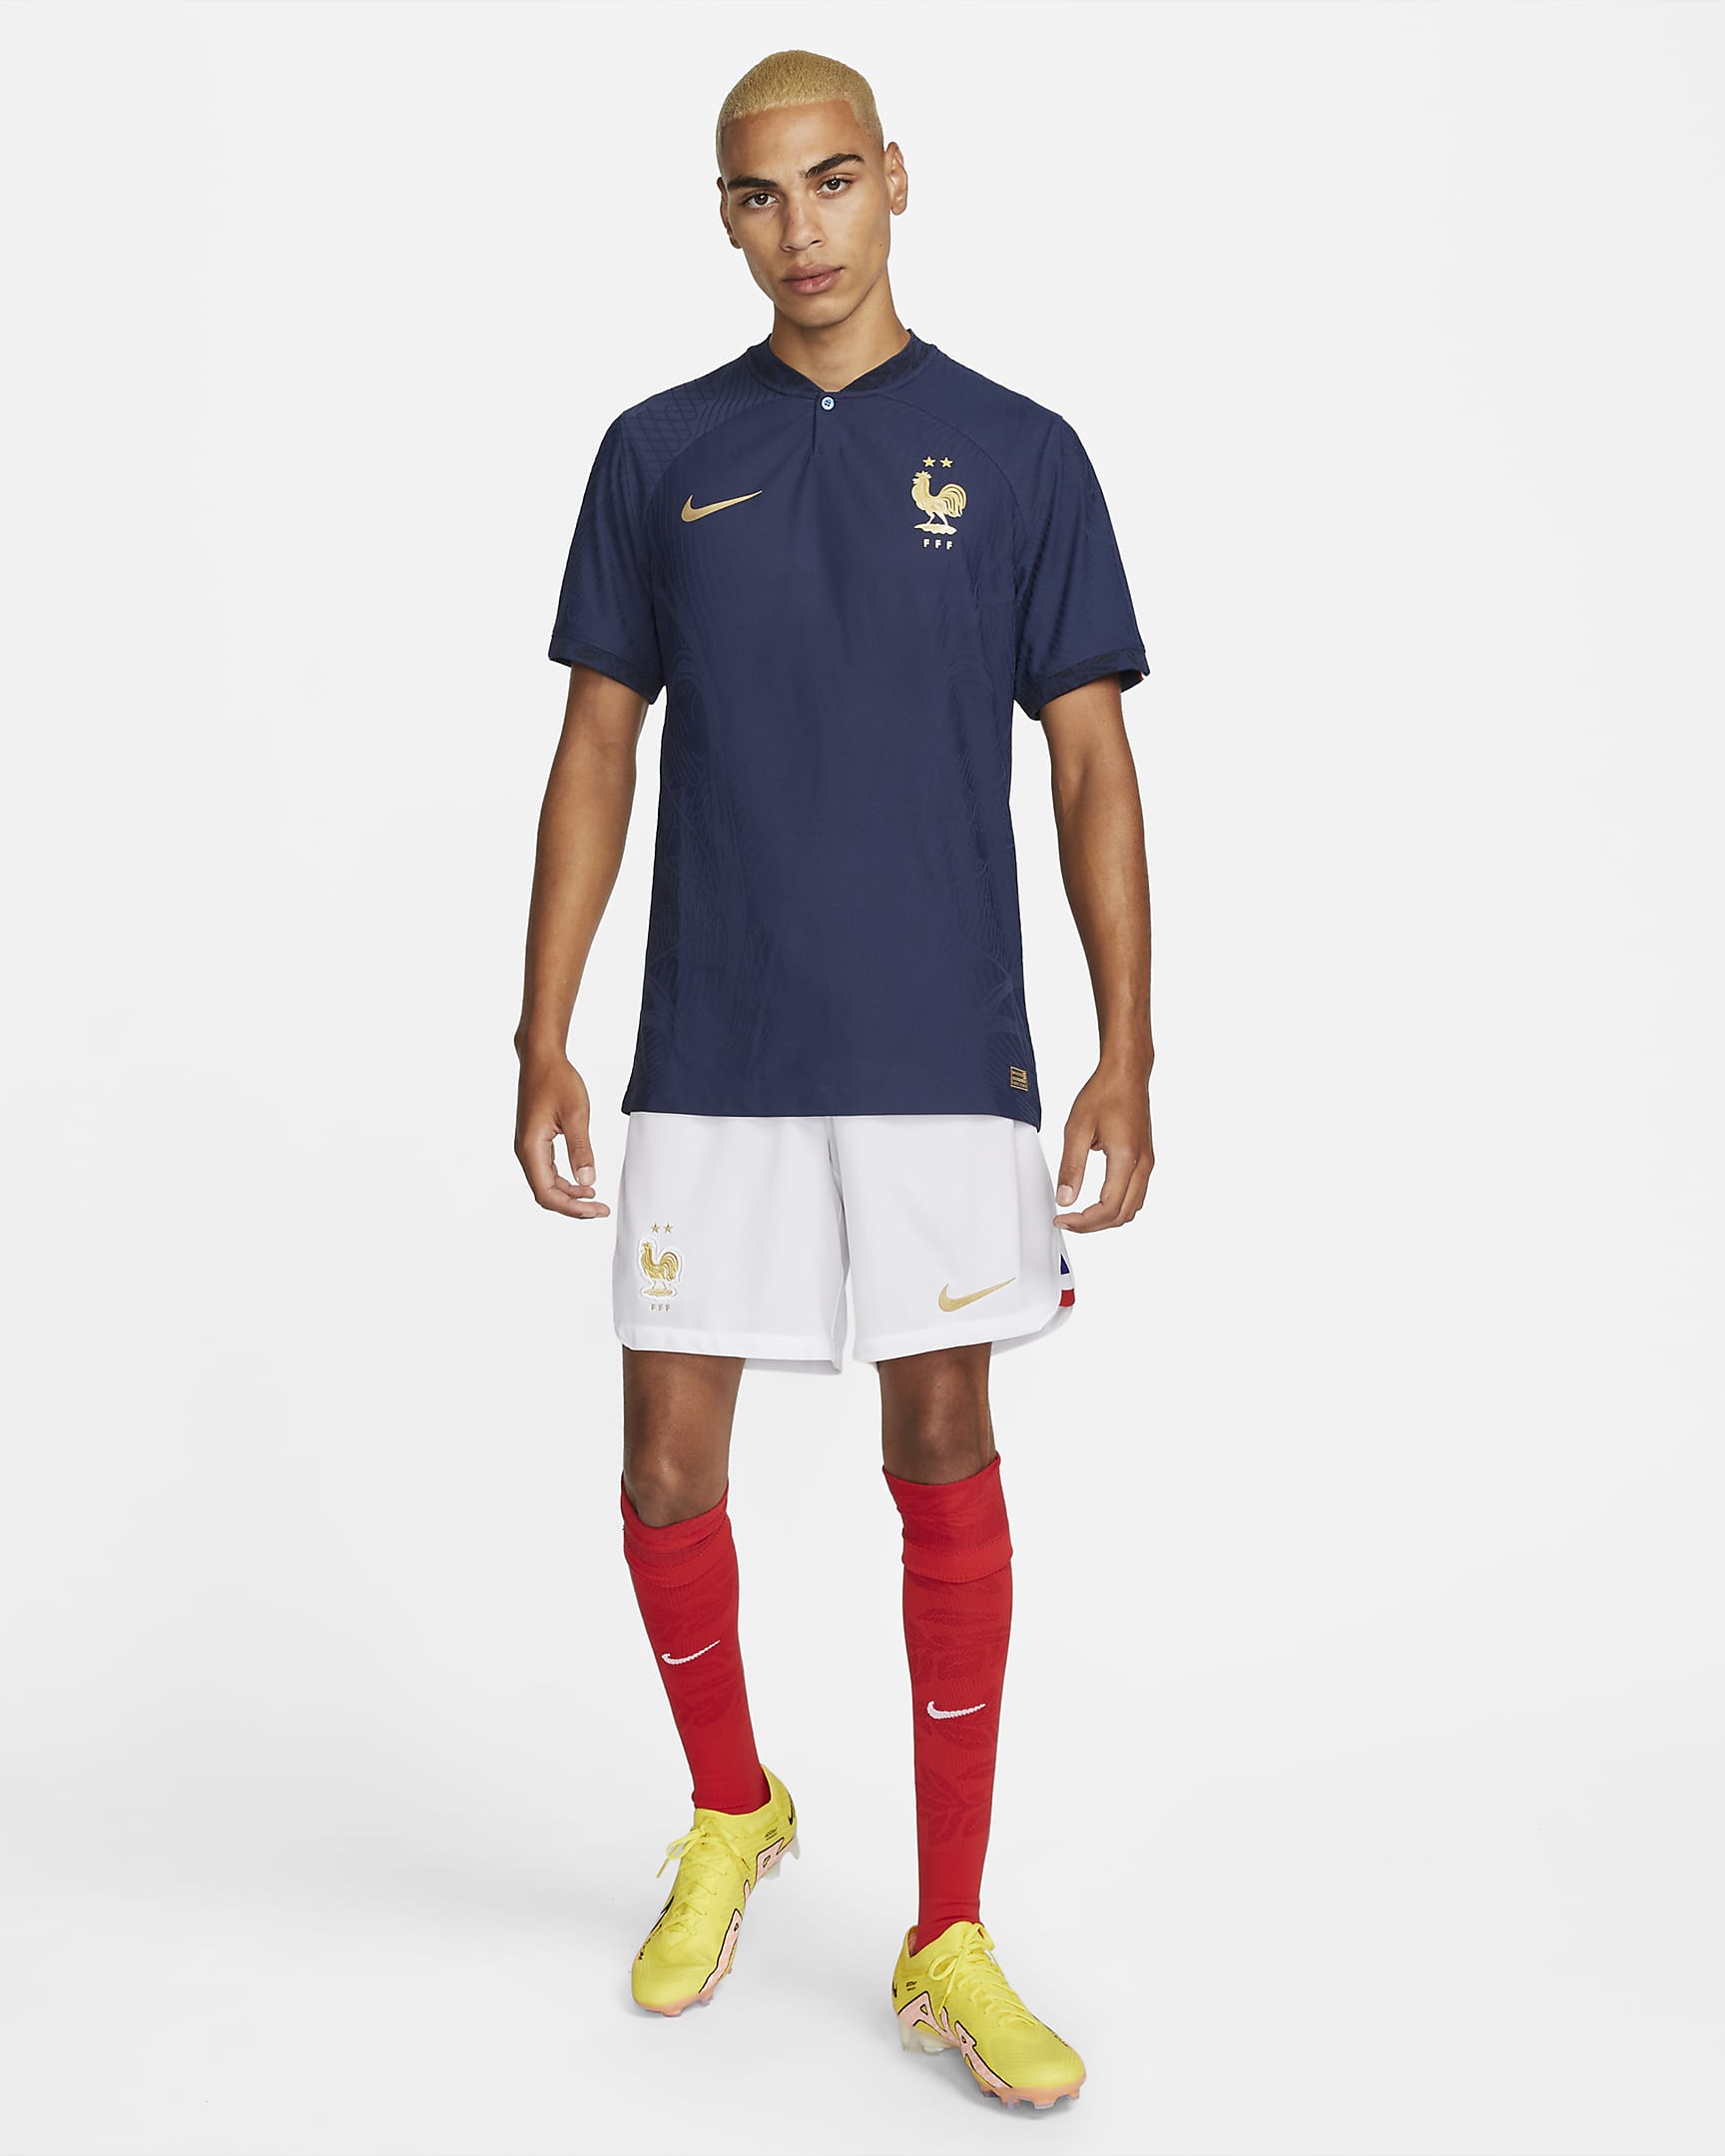 GIROUD #9 France Home Authentic Jersey World Cup 2022